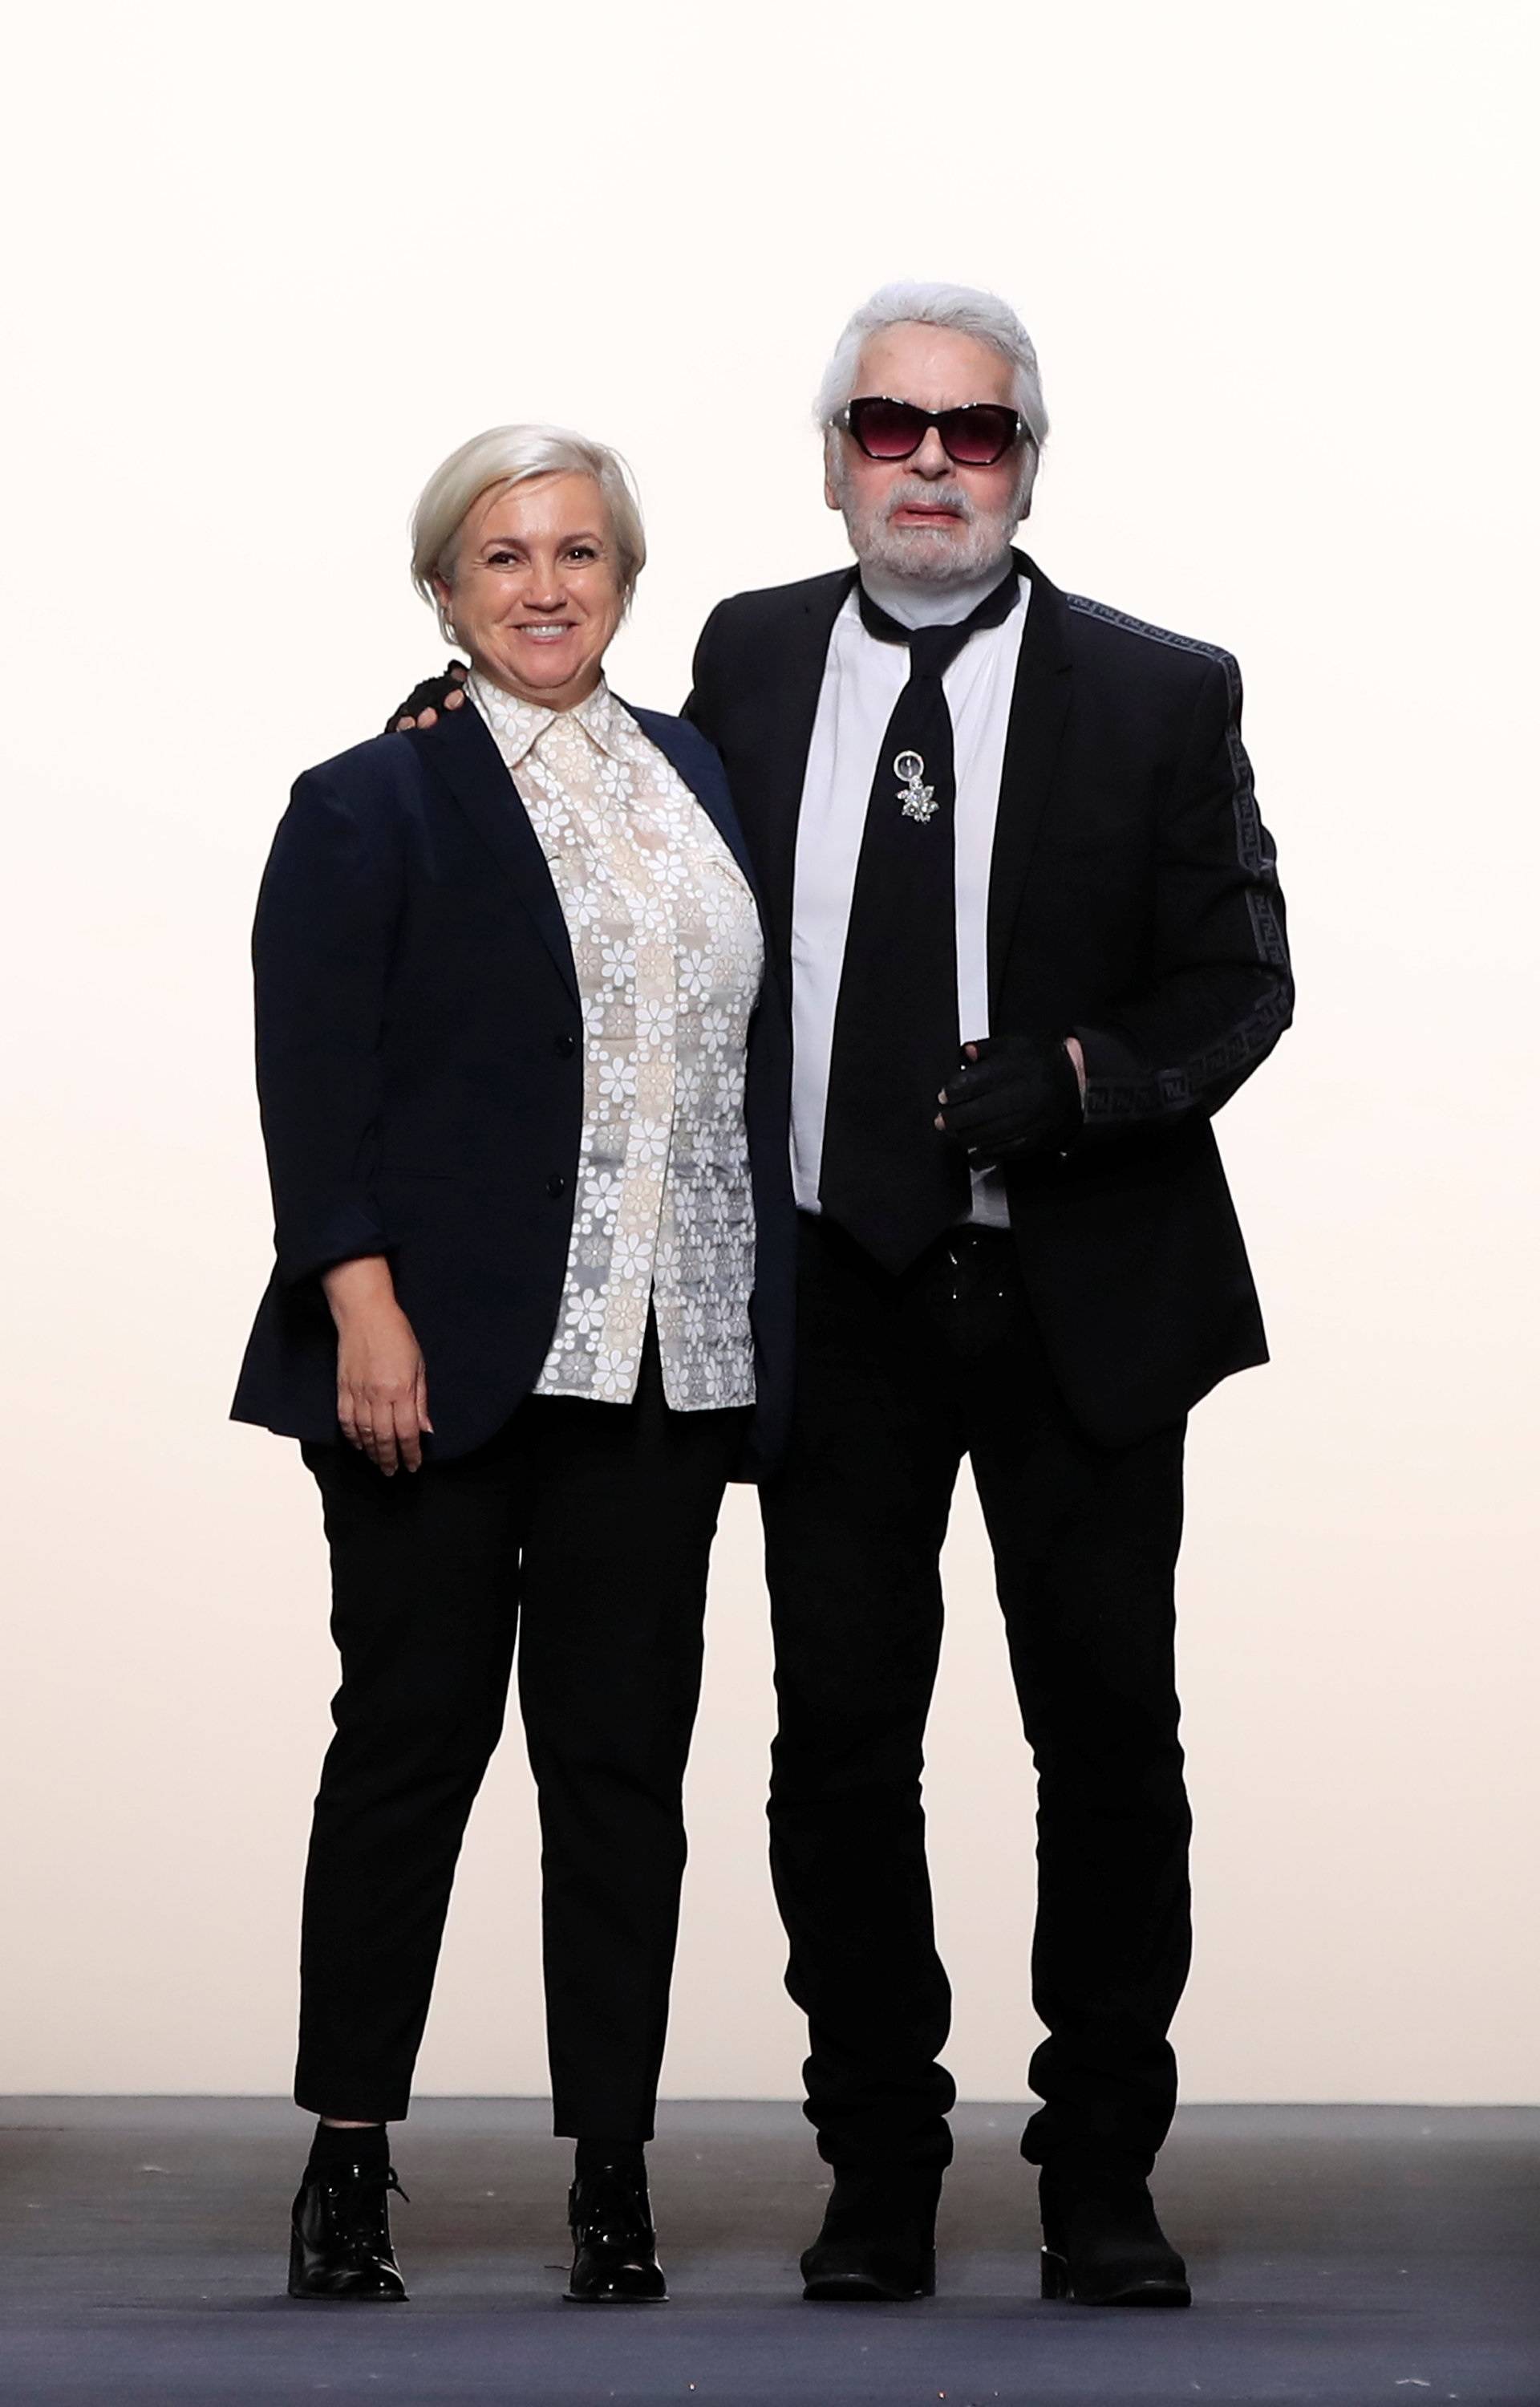 Designers Karl Lagerfeld and Silvia Venturini appears at the end of their Haute Couture Fall/Winter 2018/2019 collection show for fashion house Fendi in Paris